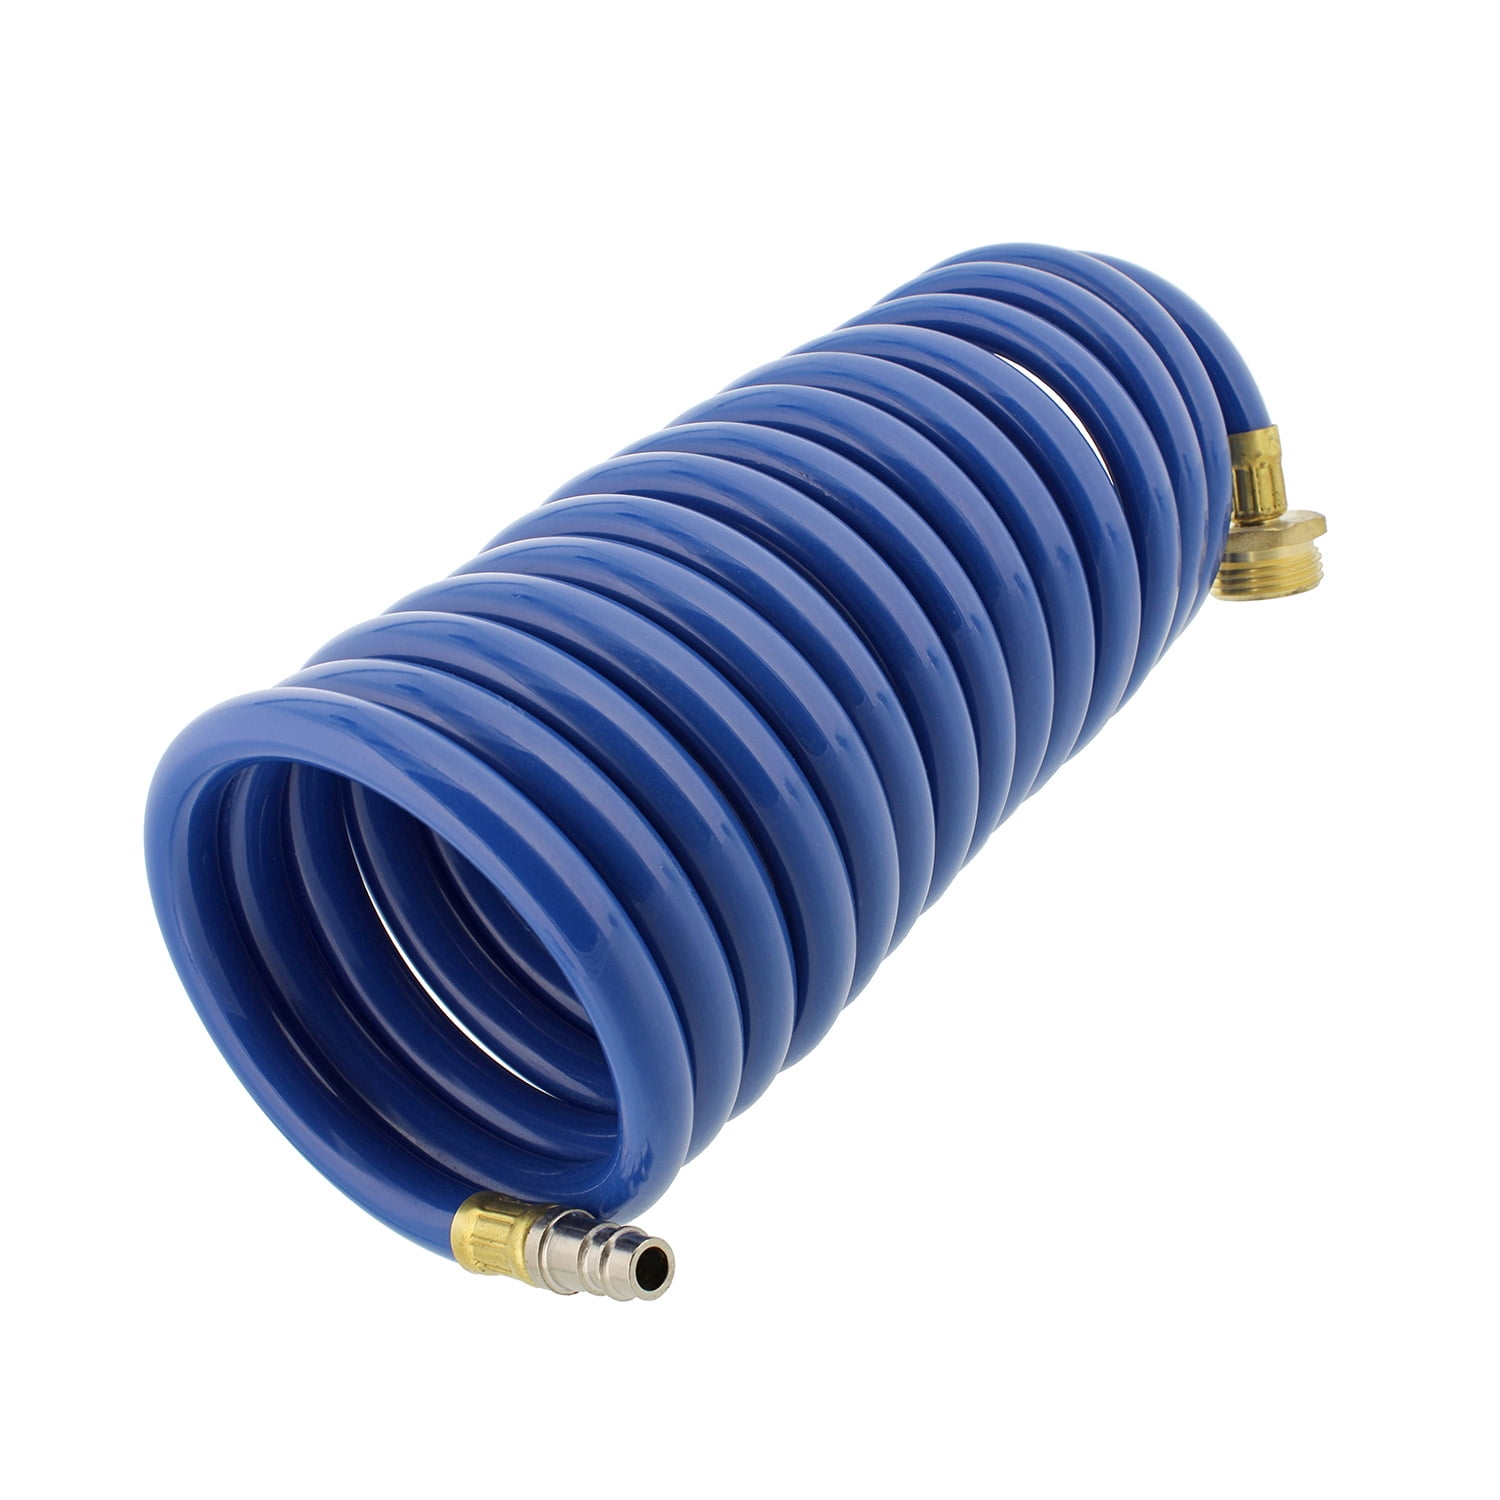 Coil Hose Water Hoses Expandable Perfect Coil Water Hose RV Wash Water Hose Spring Washdown Short Small 25 Foot Coiling Garden Marine Grade 3/4 Inch Connectors Self Recoil 25FT Coiled Boat Hose 